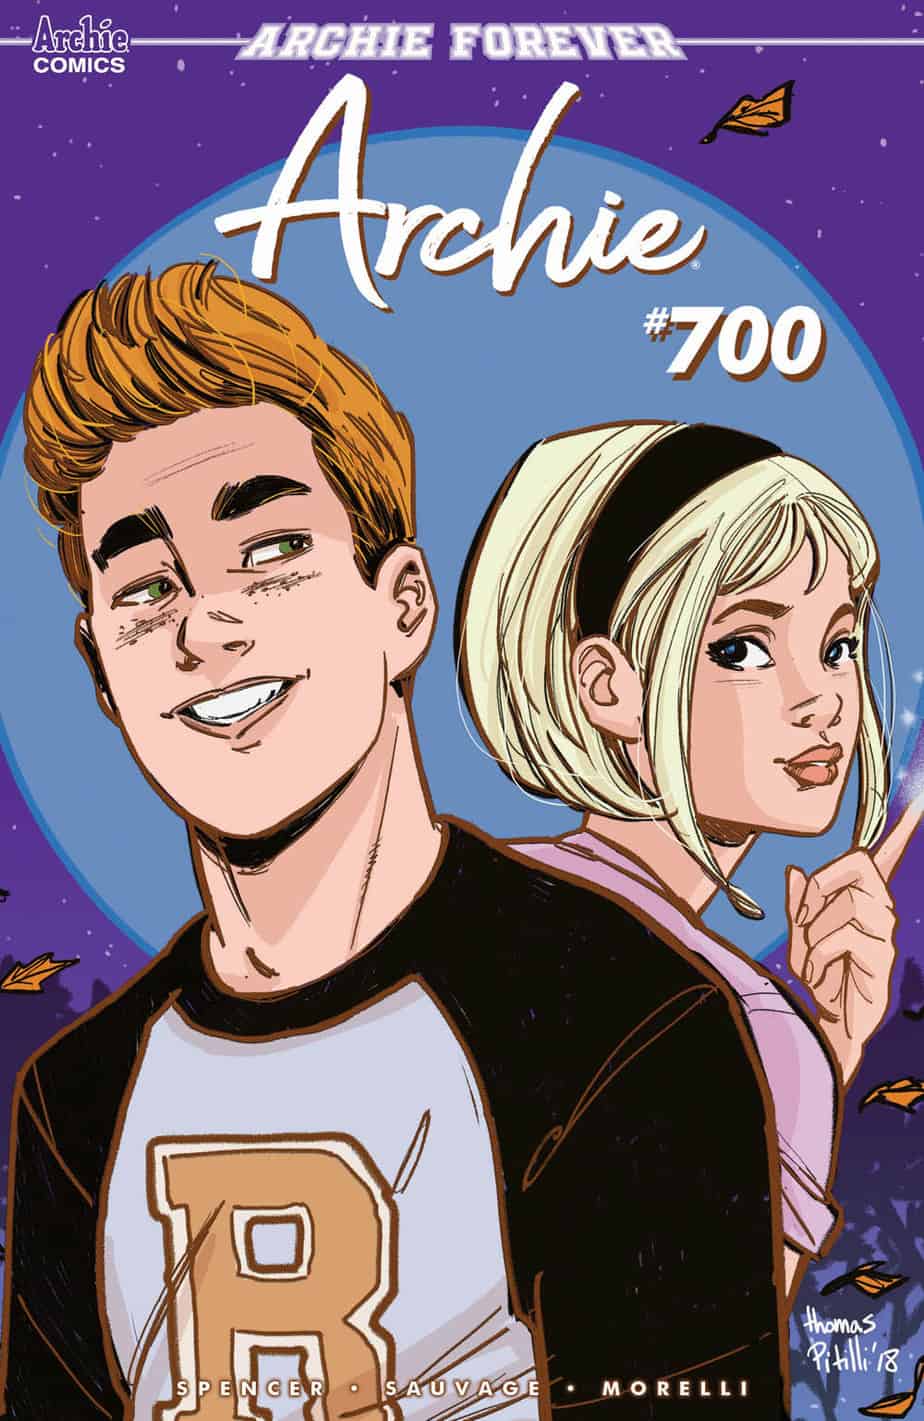 Archie #700 - Variant Cover by Thomas Pitilli